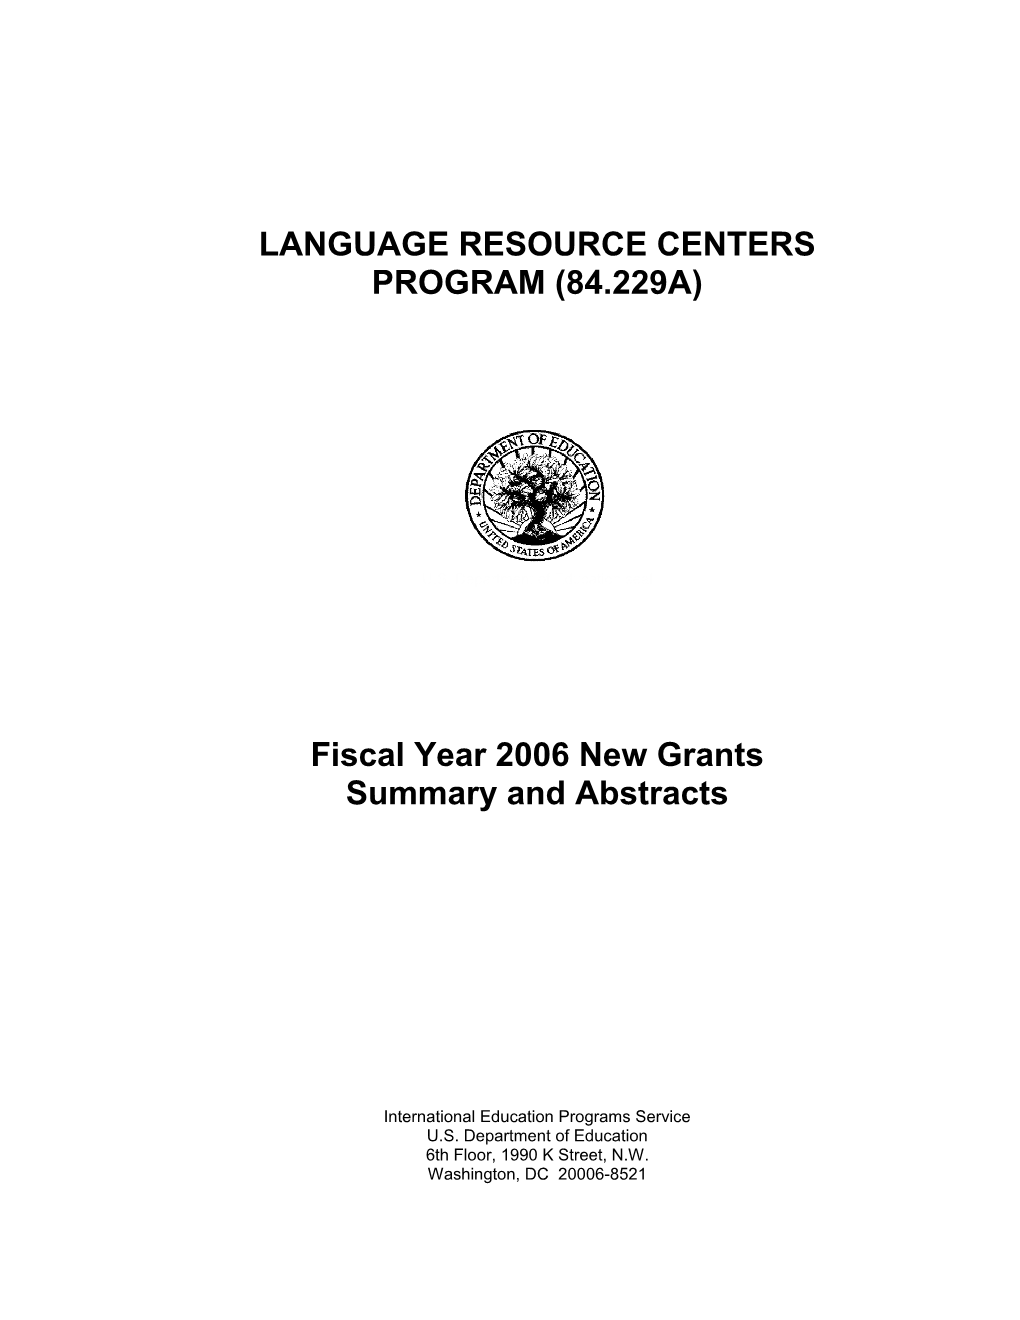 FY 2006 Project Abstracts for the Language Resource Centers Program (MS Word)